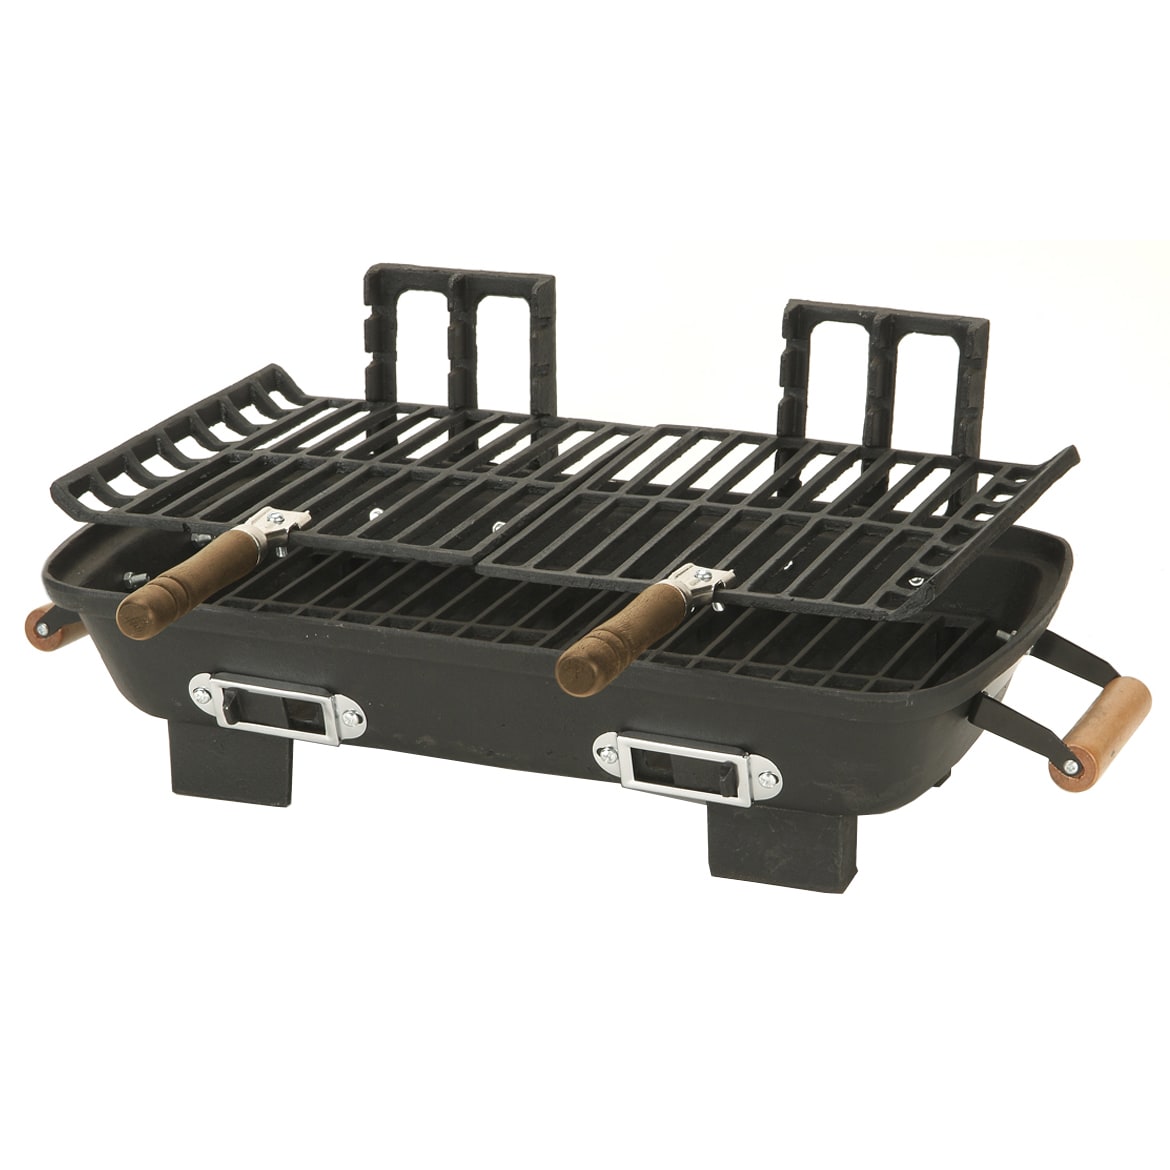 Kay Home Cast Iron Charcoal Hibachi Grill